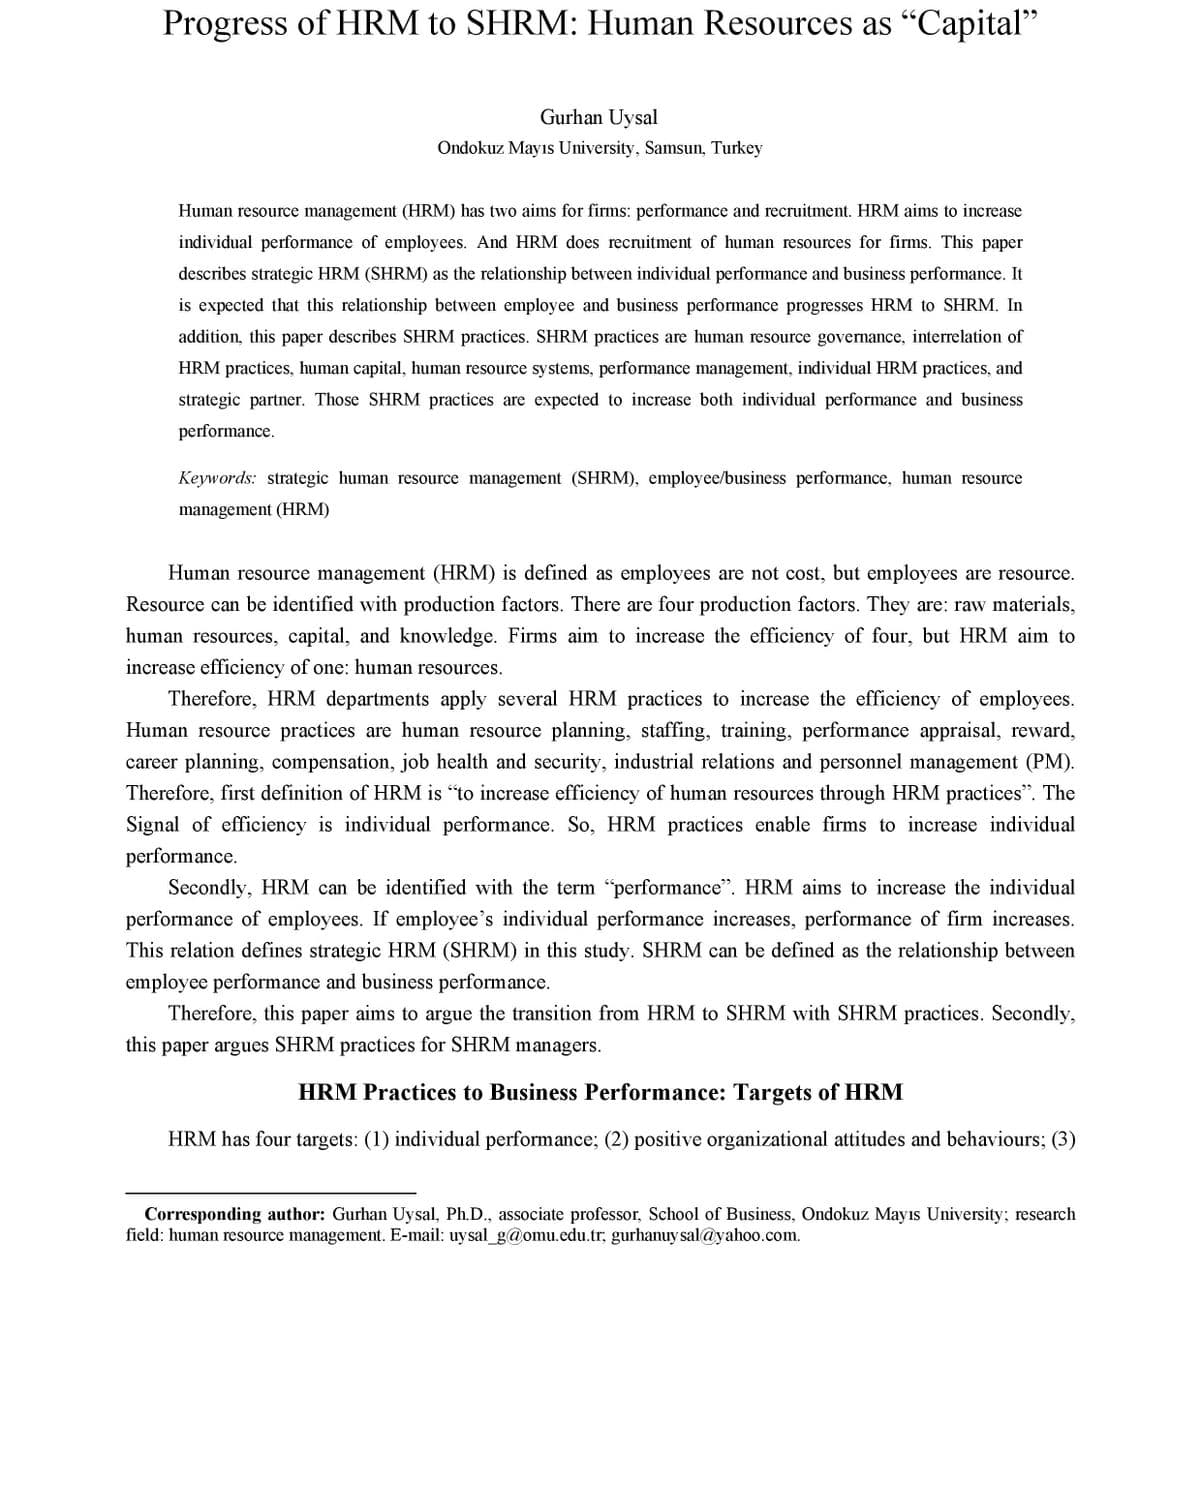 Progress of HRM to SHRM: Human Resources as "Capital"
99
Gurhan Uysal
Ondokuz Mayıs University, Samsun, Turkey
Human resource management (HRM) has two aims for firms: performance and recruitment. HRM aims to increase
individual performance of employees. And HRM does recruitment of human resources for firms. This paper
describes strategic HRM (SHRM) as the relationship between individual performance and business performance. It
is expected that this relationship between employee and business performance progresses HRM to SHRM. In
addition, this paper describes SHRM practices. SHRM practices are human resource governance, interrelation of
HRM practices, human capital, human resource systems, performance management, individual HRM practices, and
strategic partner. Those SHRM practices are expected to increase both individual performance and business
performance.
Keywords: strategic human resource management (SHRM), employee/business performance, human resource
management (HRM)
Human resource management (HRM) is defined as employees are not cost, but employees are resource.
Resource can be identified with production factors. There are four production factors. They are: raw materials,
human resources, capital, and knowledge. Firms aim to increase the efficiency of four, but HRM aim to
increase efficiency of one: human resources.
Therefore, HRM departments apply several HRM practices to increase the efficiency of employees.
Human resource practices are human resource planning, staffing, training, performance appraisal, reward,
career planning, compensation, job health and security, industrial relations and personnel management (PM).
Therefore, first definition of HRM is "to increase efficiency of human resources through HRM practices". The
Signal of efficiency is individual performance. So, HRM practices enable firms to increase individual
performance.
Secondly, HRM can be identified with the term "performance". HRM aims to increase the individual
performance of employees. If employee's individual performance increases, performance of firm increases.
This relation defines strategic HRM (SHRM) in this study. SHRM can be defined as the relationship between
employee performance and business performance.
Therefore, this paper aims to argue the transition from HRM to SHRM with SHRM practices. Secondly,
this paper argues SHRM practices for SHRM managers.
HRM Practices to Business Performance: Targets of HRM
HRM has four targets: (1) individual performance; (2) positive organizational attitudes and behaviours; (3)
Corresponding author: Gurhan Uysal, Ph.D., associate professor, School of Business, Ondokuz Mayıs University; research
field: human resource management. E-mail: uysal_g@omu.edu.tr; gurhanuy sal@yahoo.com.
